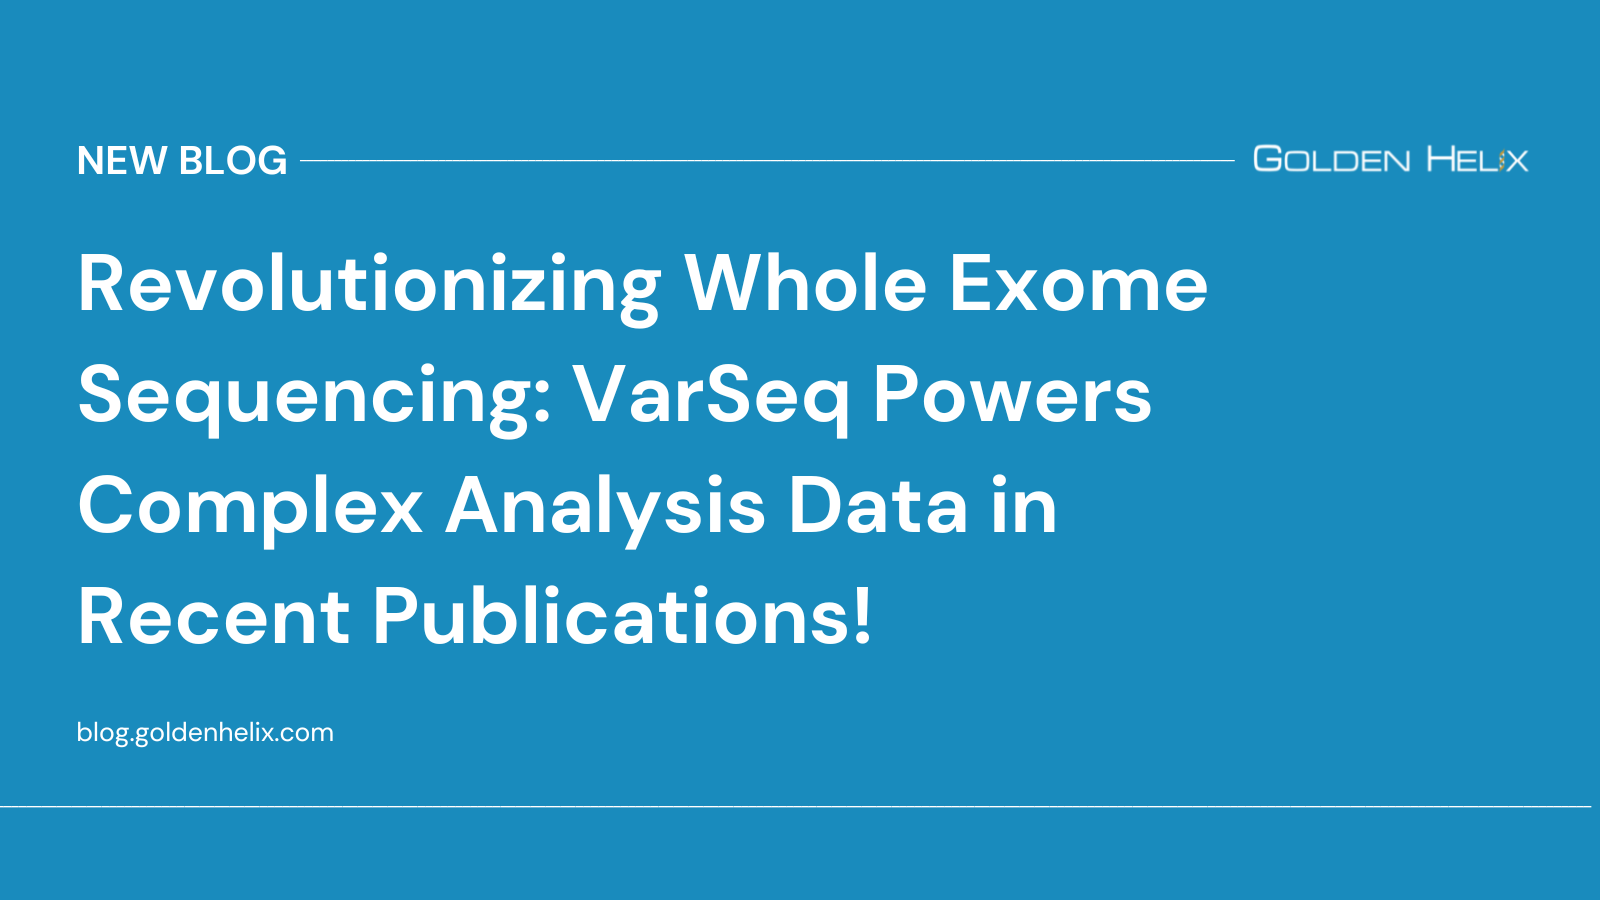 Revolutionizing Whole Exome Sequencing VarSeq Powers Complex Analysis Data in Recent Publications!